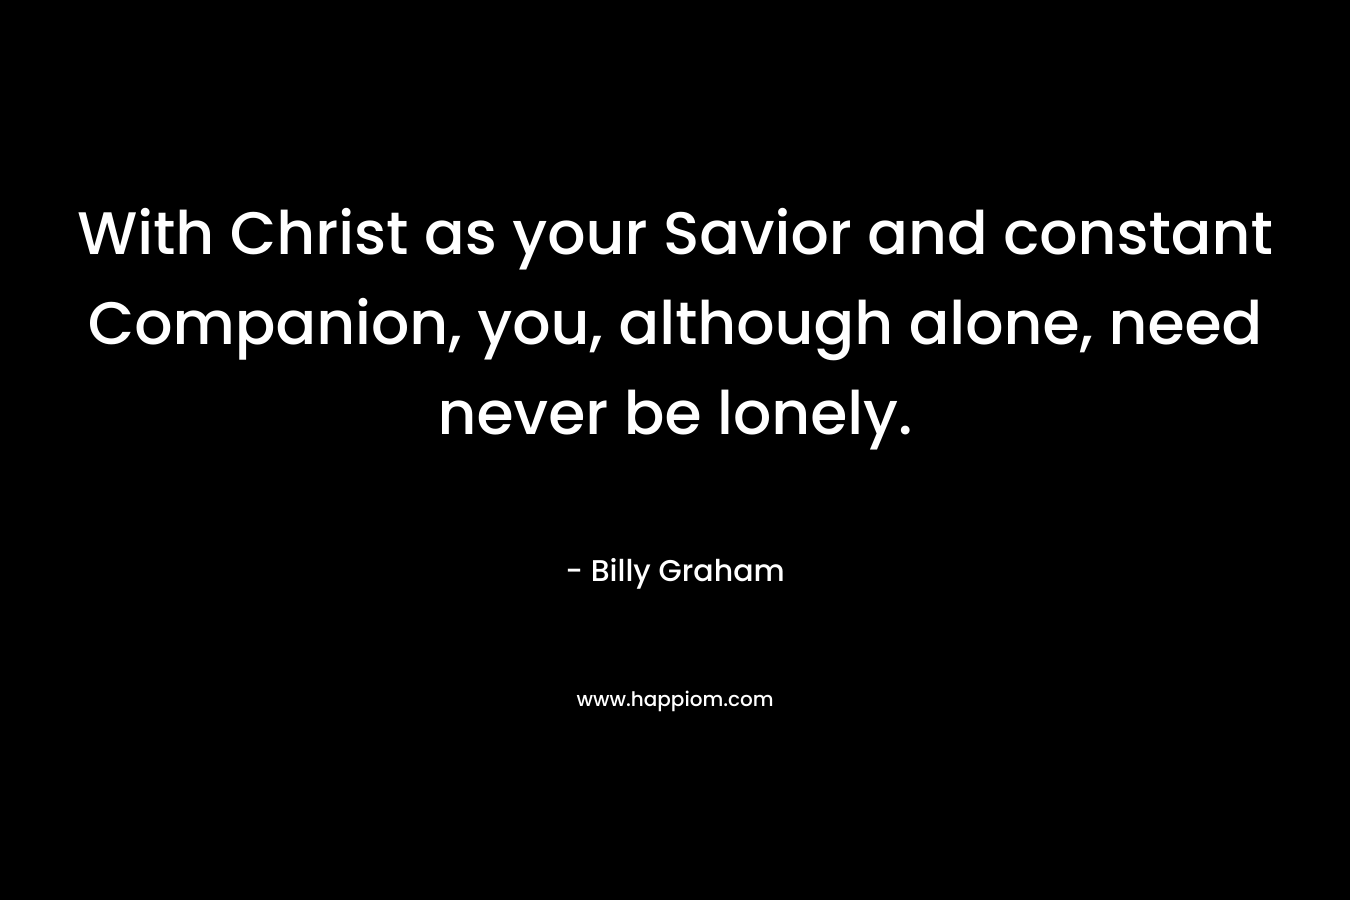 With Christ as your Savior and constant Companion, you, although alone, need never be lonely.